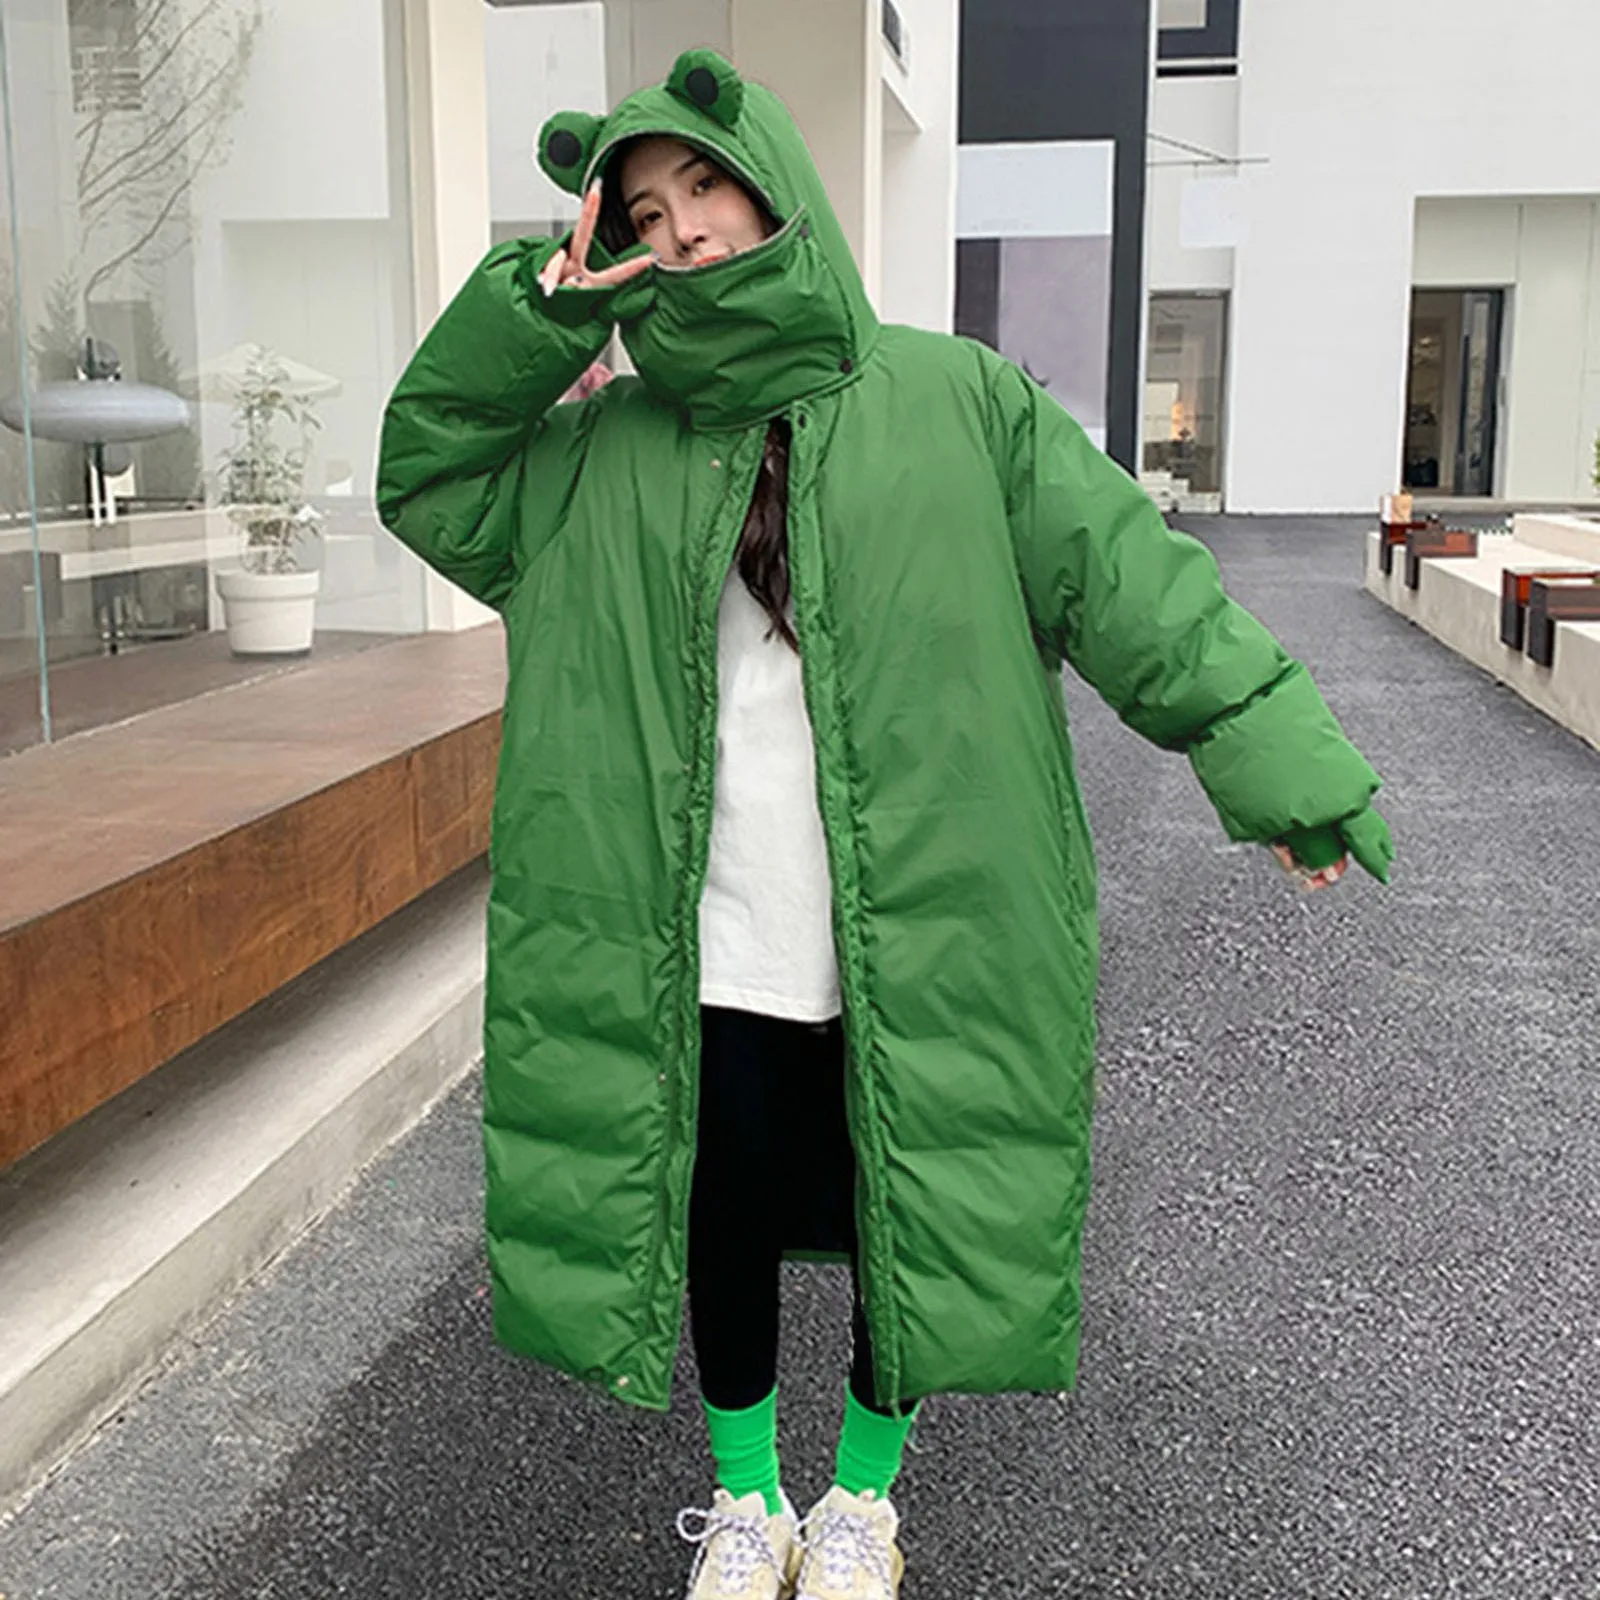 Ugly Funny Fog Jacket Womens Autumn Winter Green Parkas Hoodies Slim Outdoor Padded Blazer Korean Doll Cosplay Chaquetas Mujer hoodies for men tactical outdoor fleece jacket hunting clothes warm zipper pullover man windproof coat thermal hiking sweater